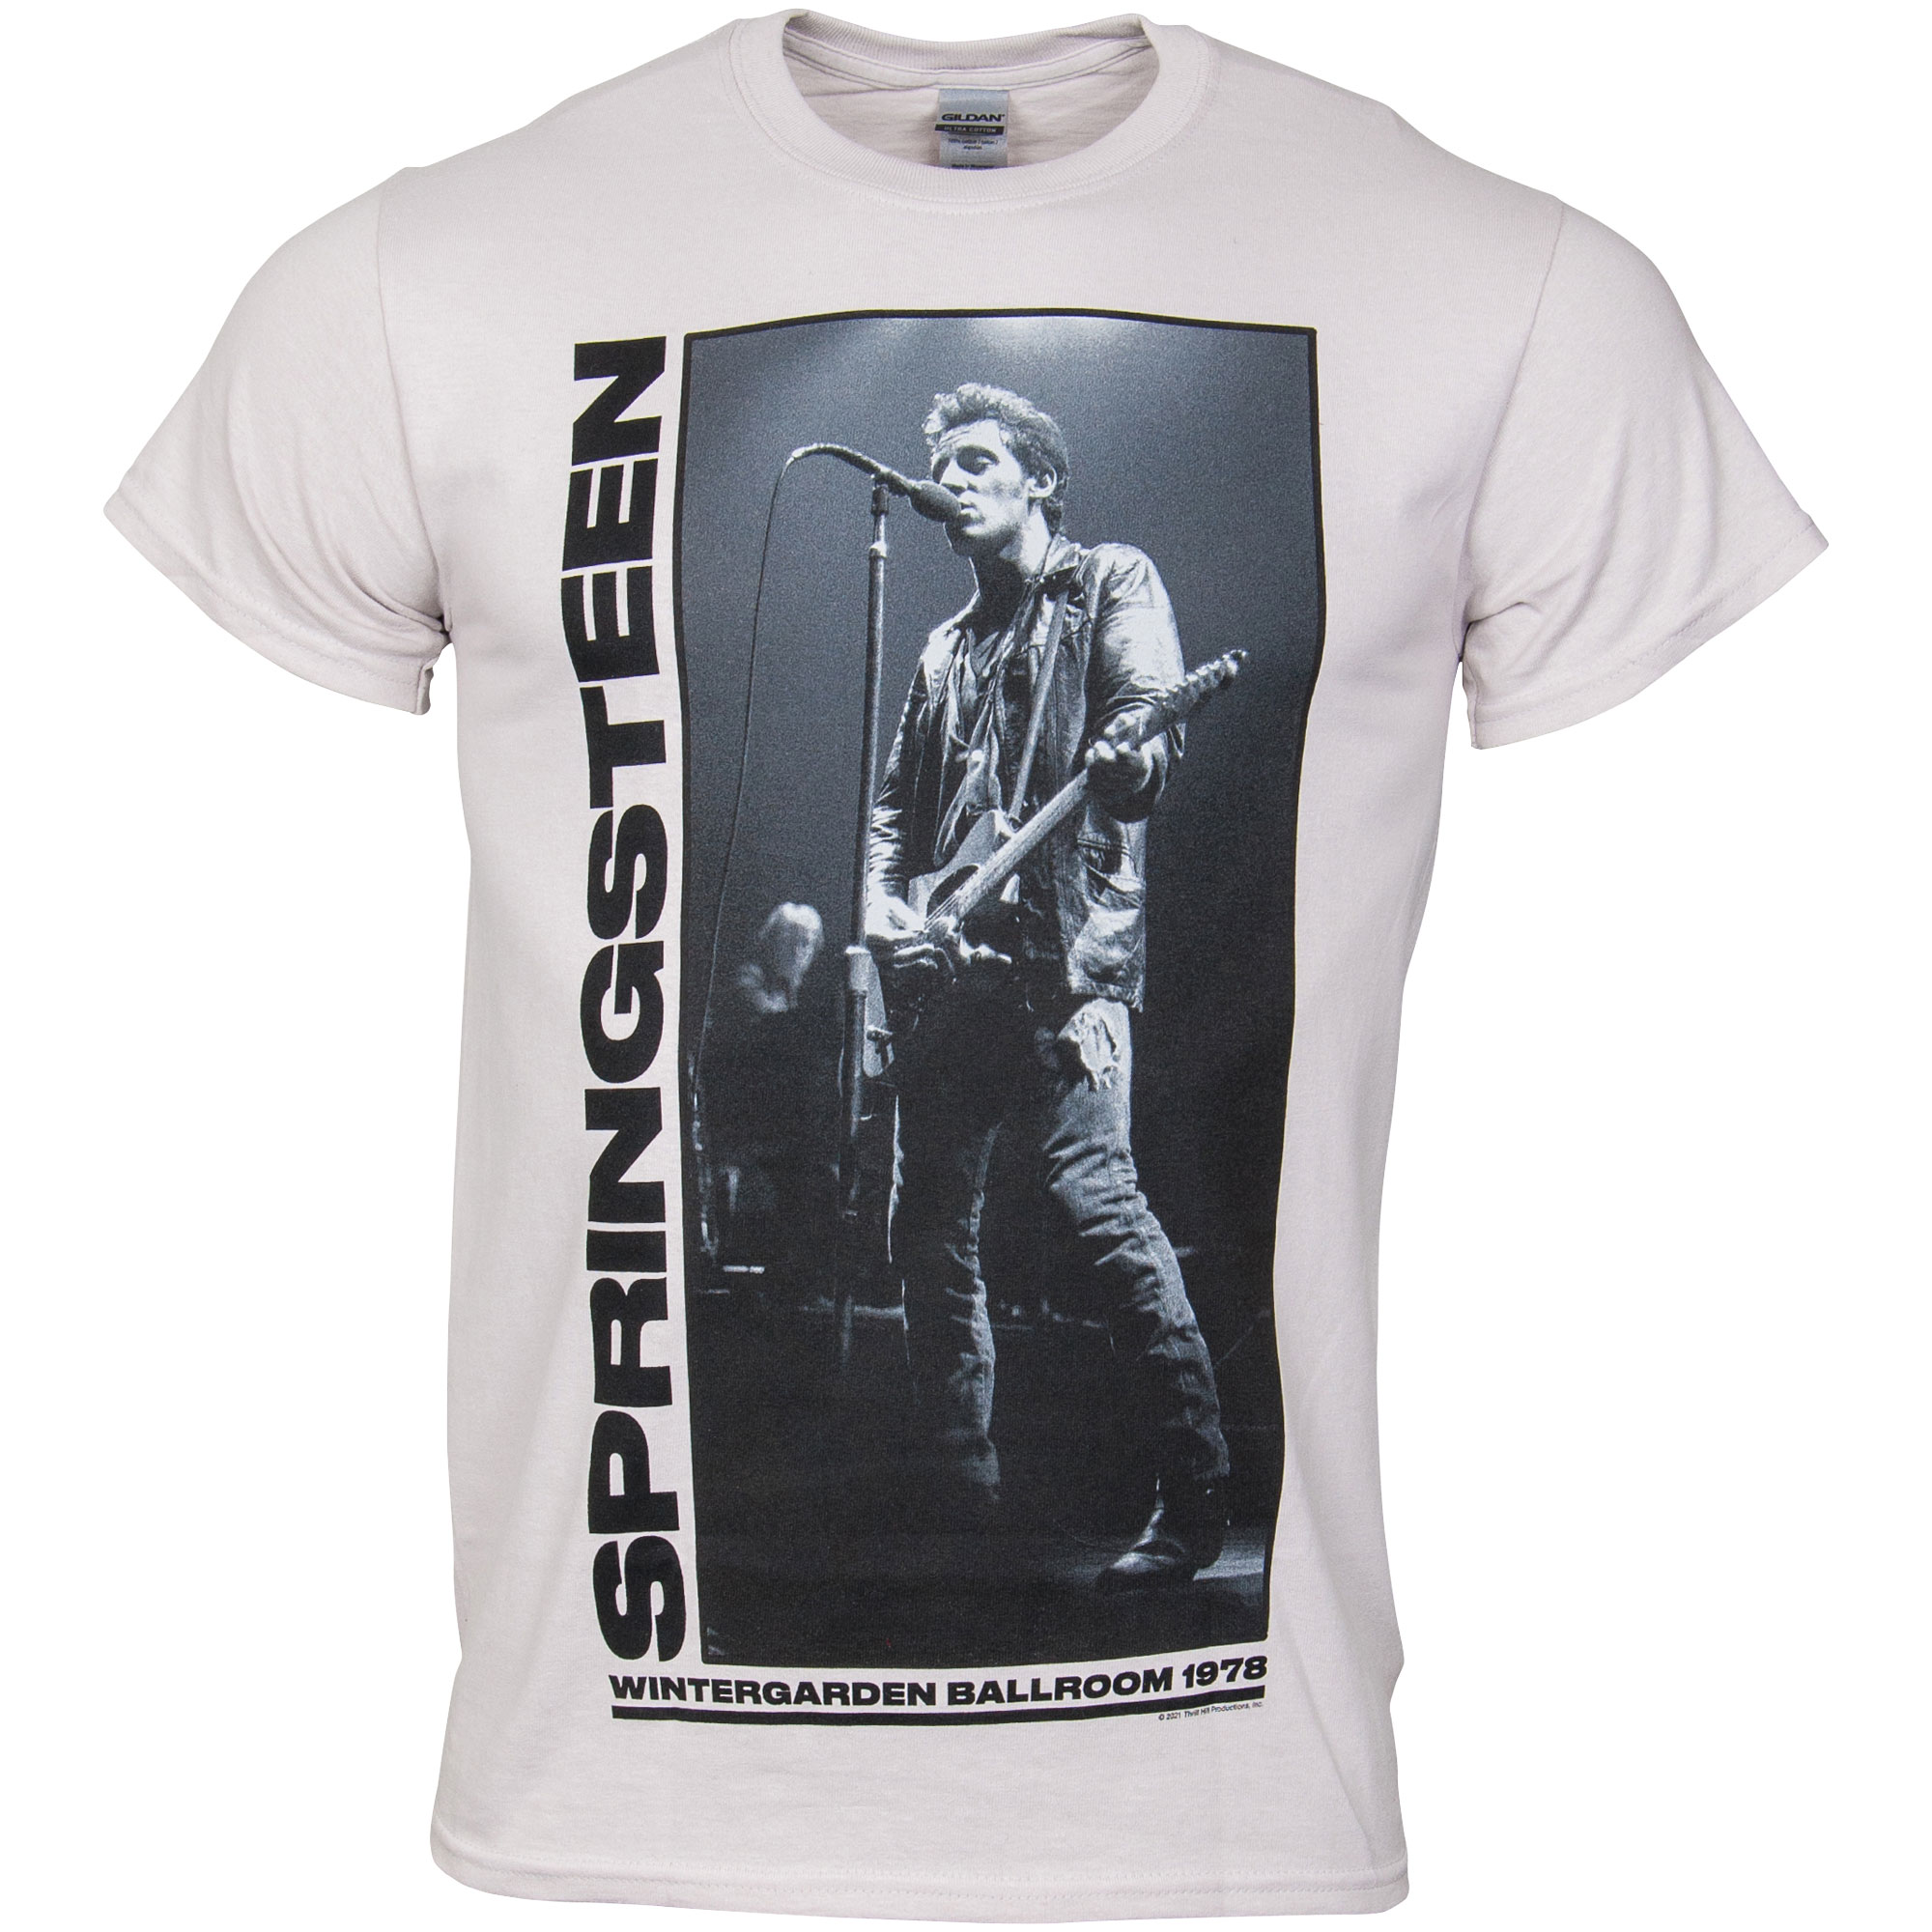 Amazing Bruce Springsteen T Shirt Uk Check it out now!